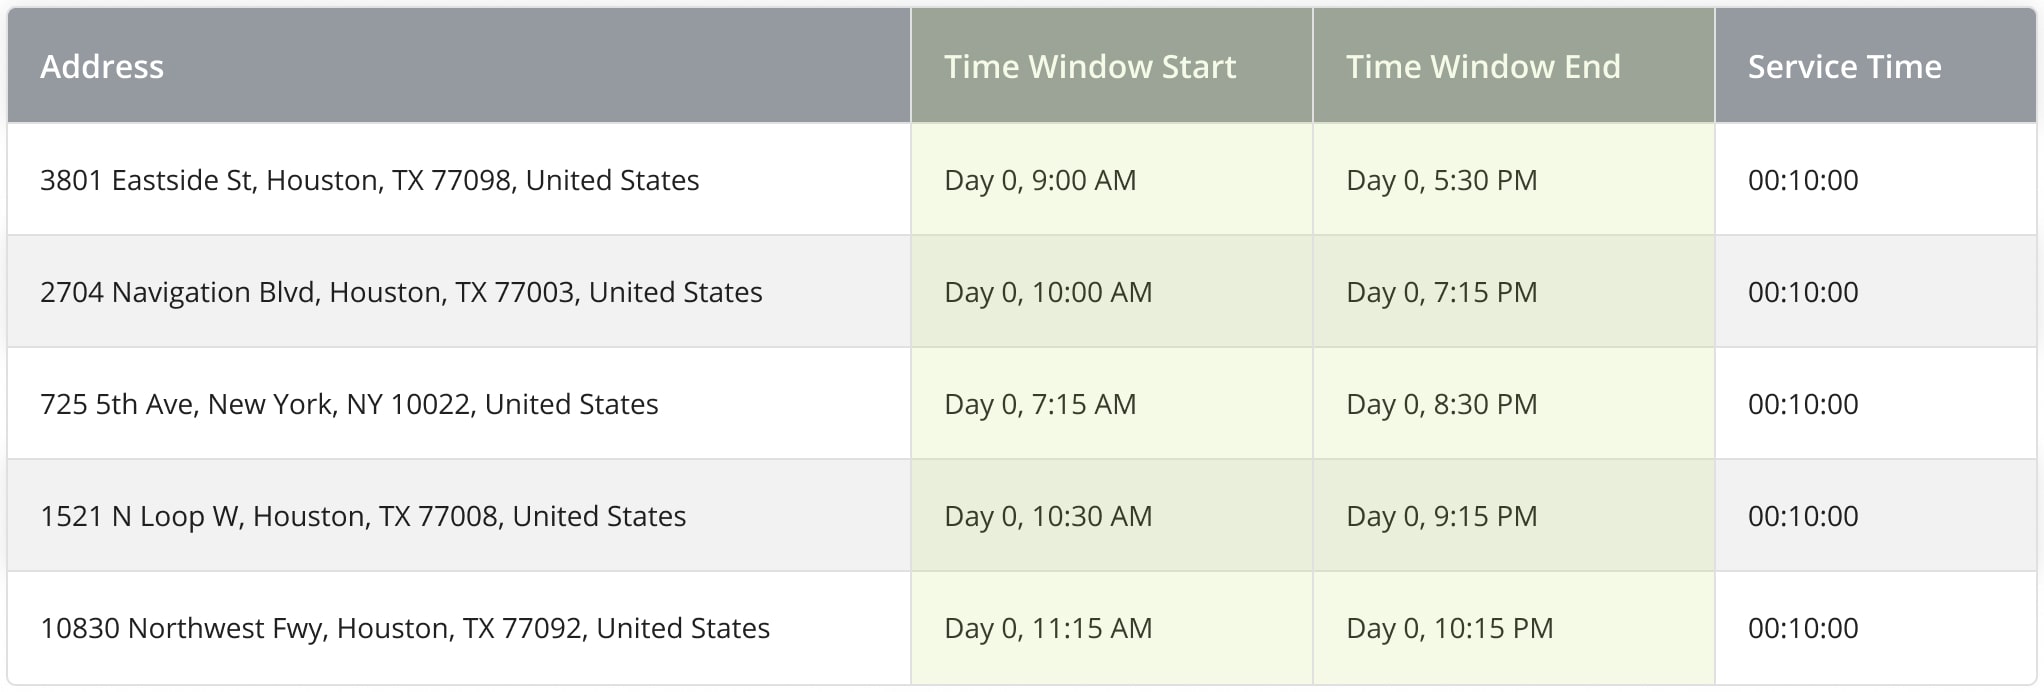 Format spreadsheet with addresses and customer working hours for Time Windows route planning and optimization.